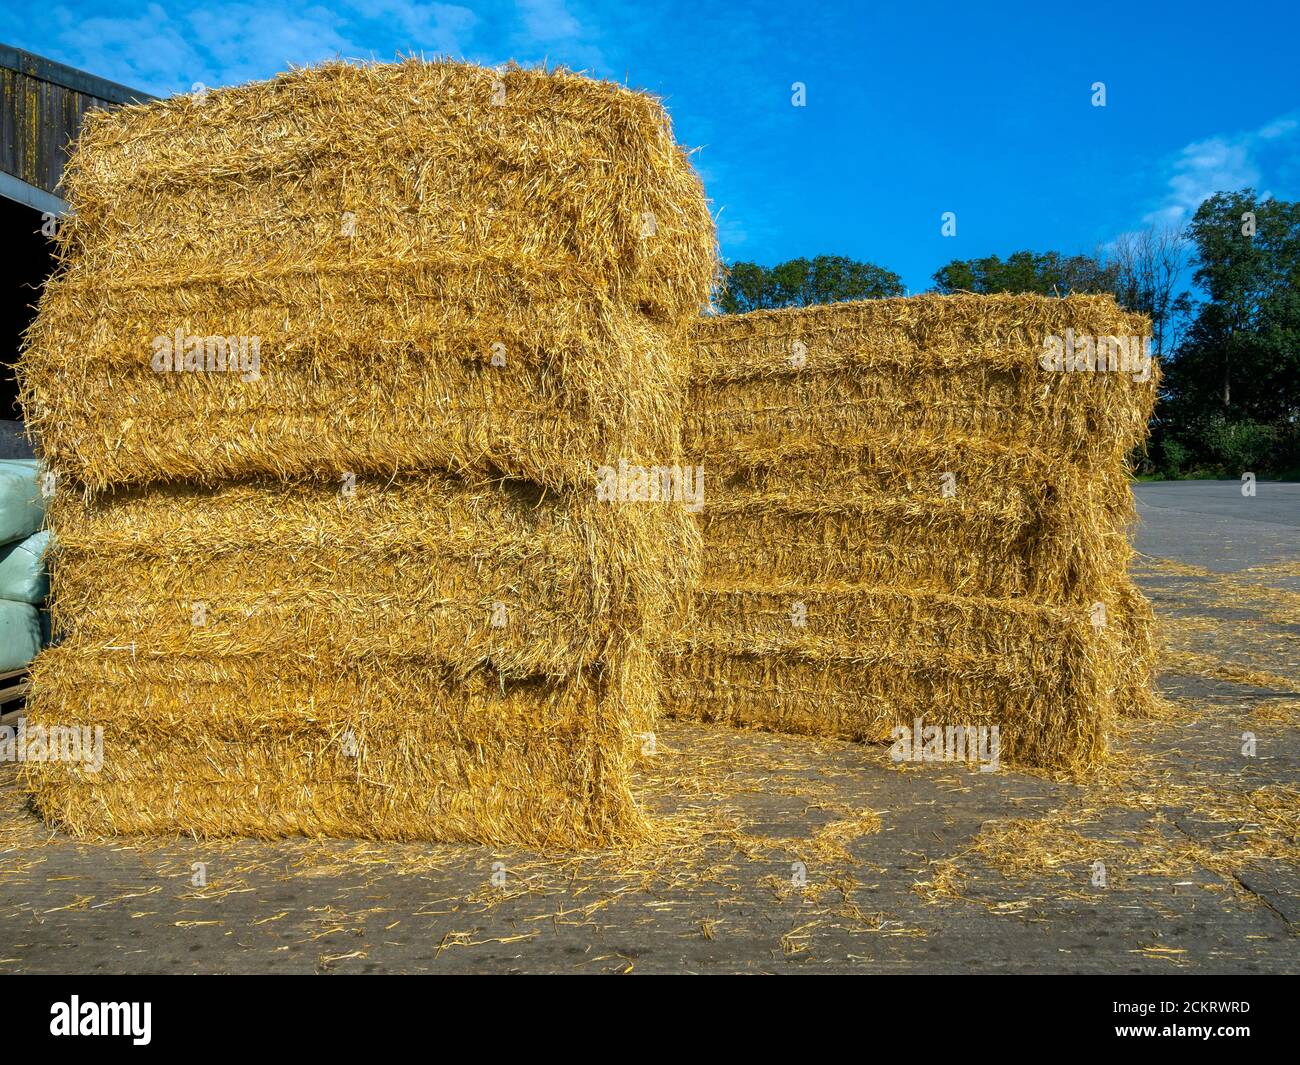 Recangular hay or straw bales for winter cattle feed on a farm newly harvested September 2020 Stock Photo